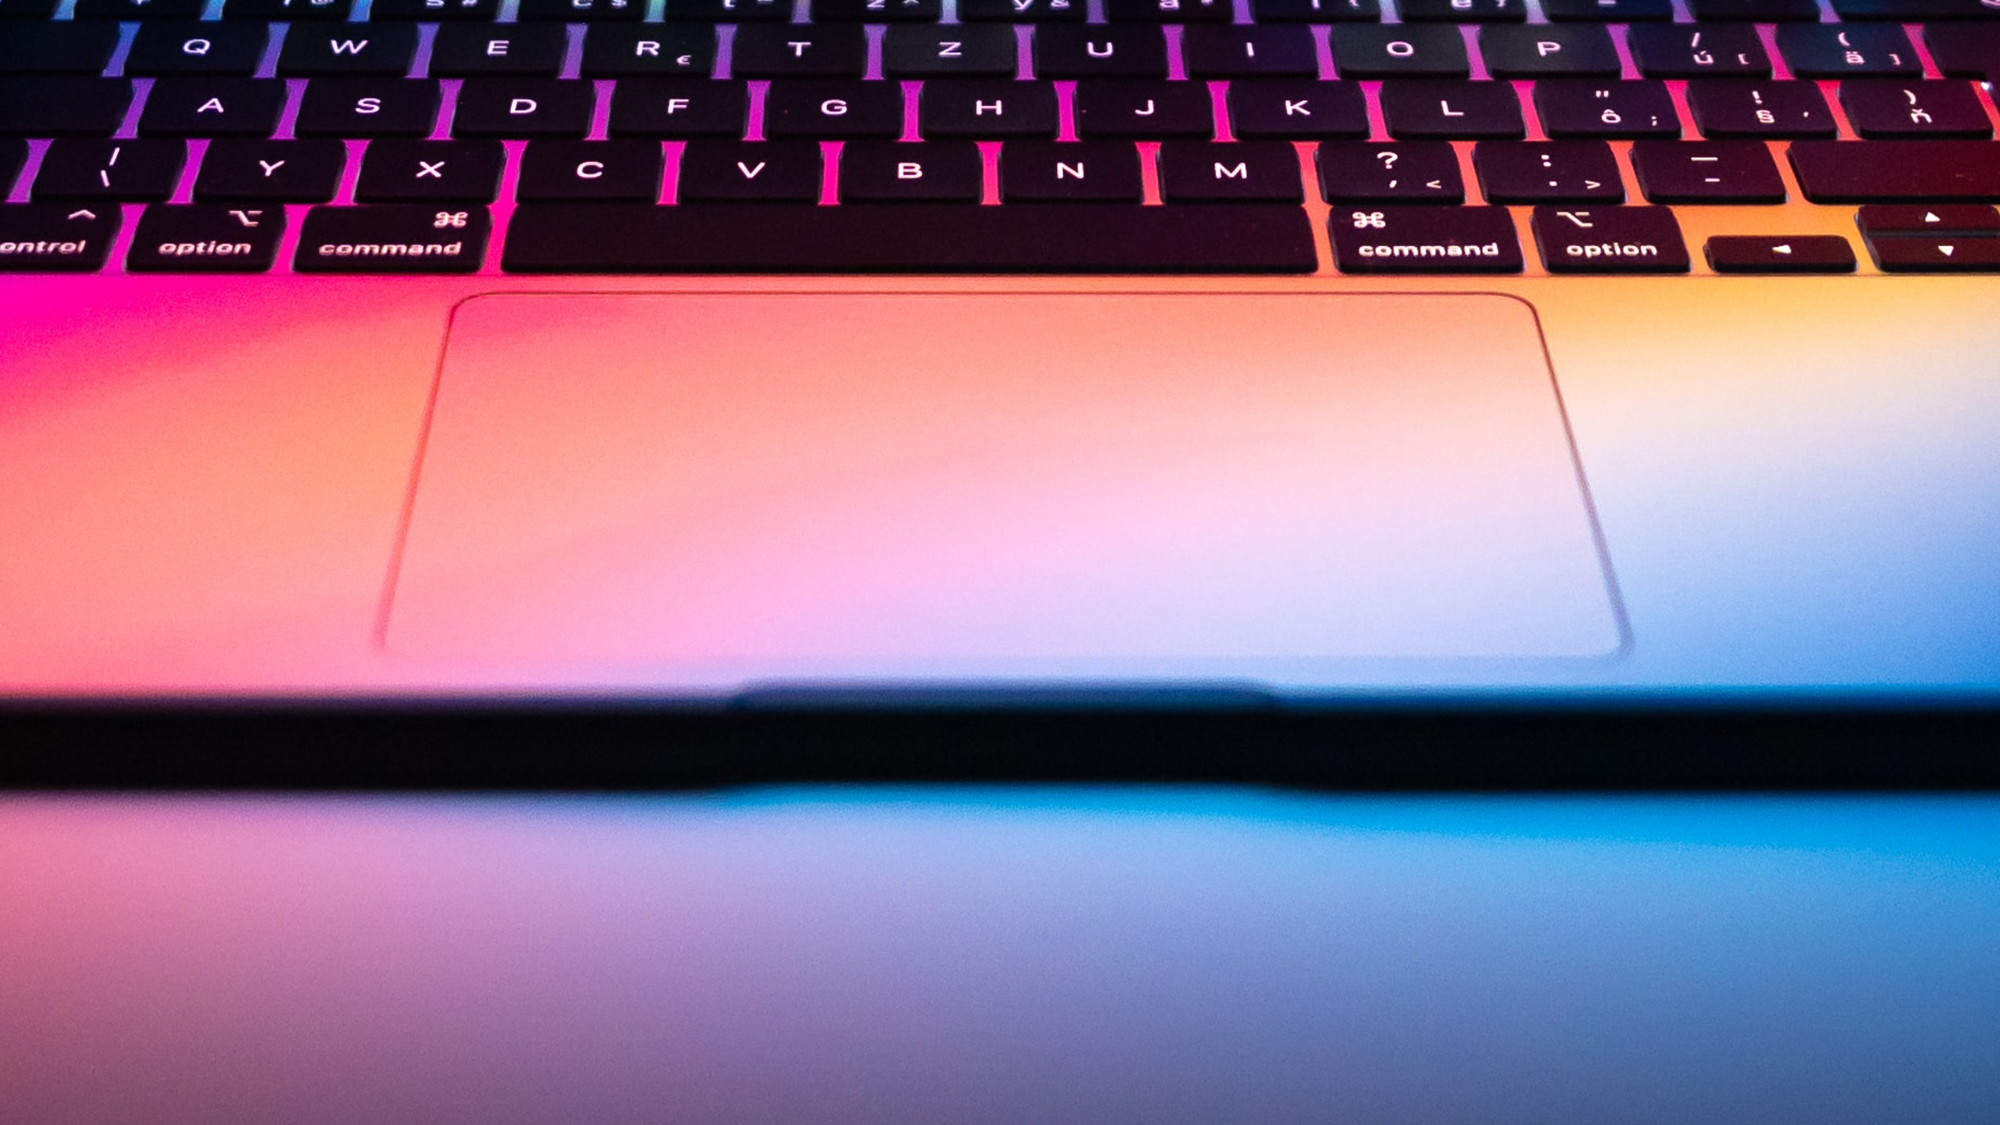 Your Mac’s trackpad doesn’t have to be basic. Here’s how to customize it.